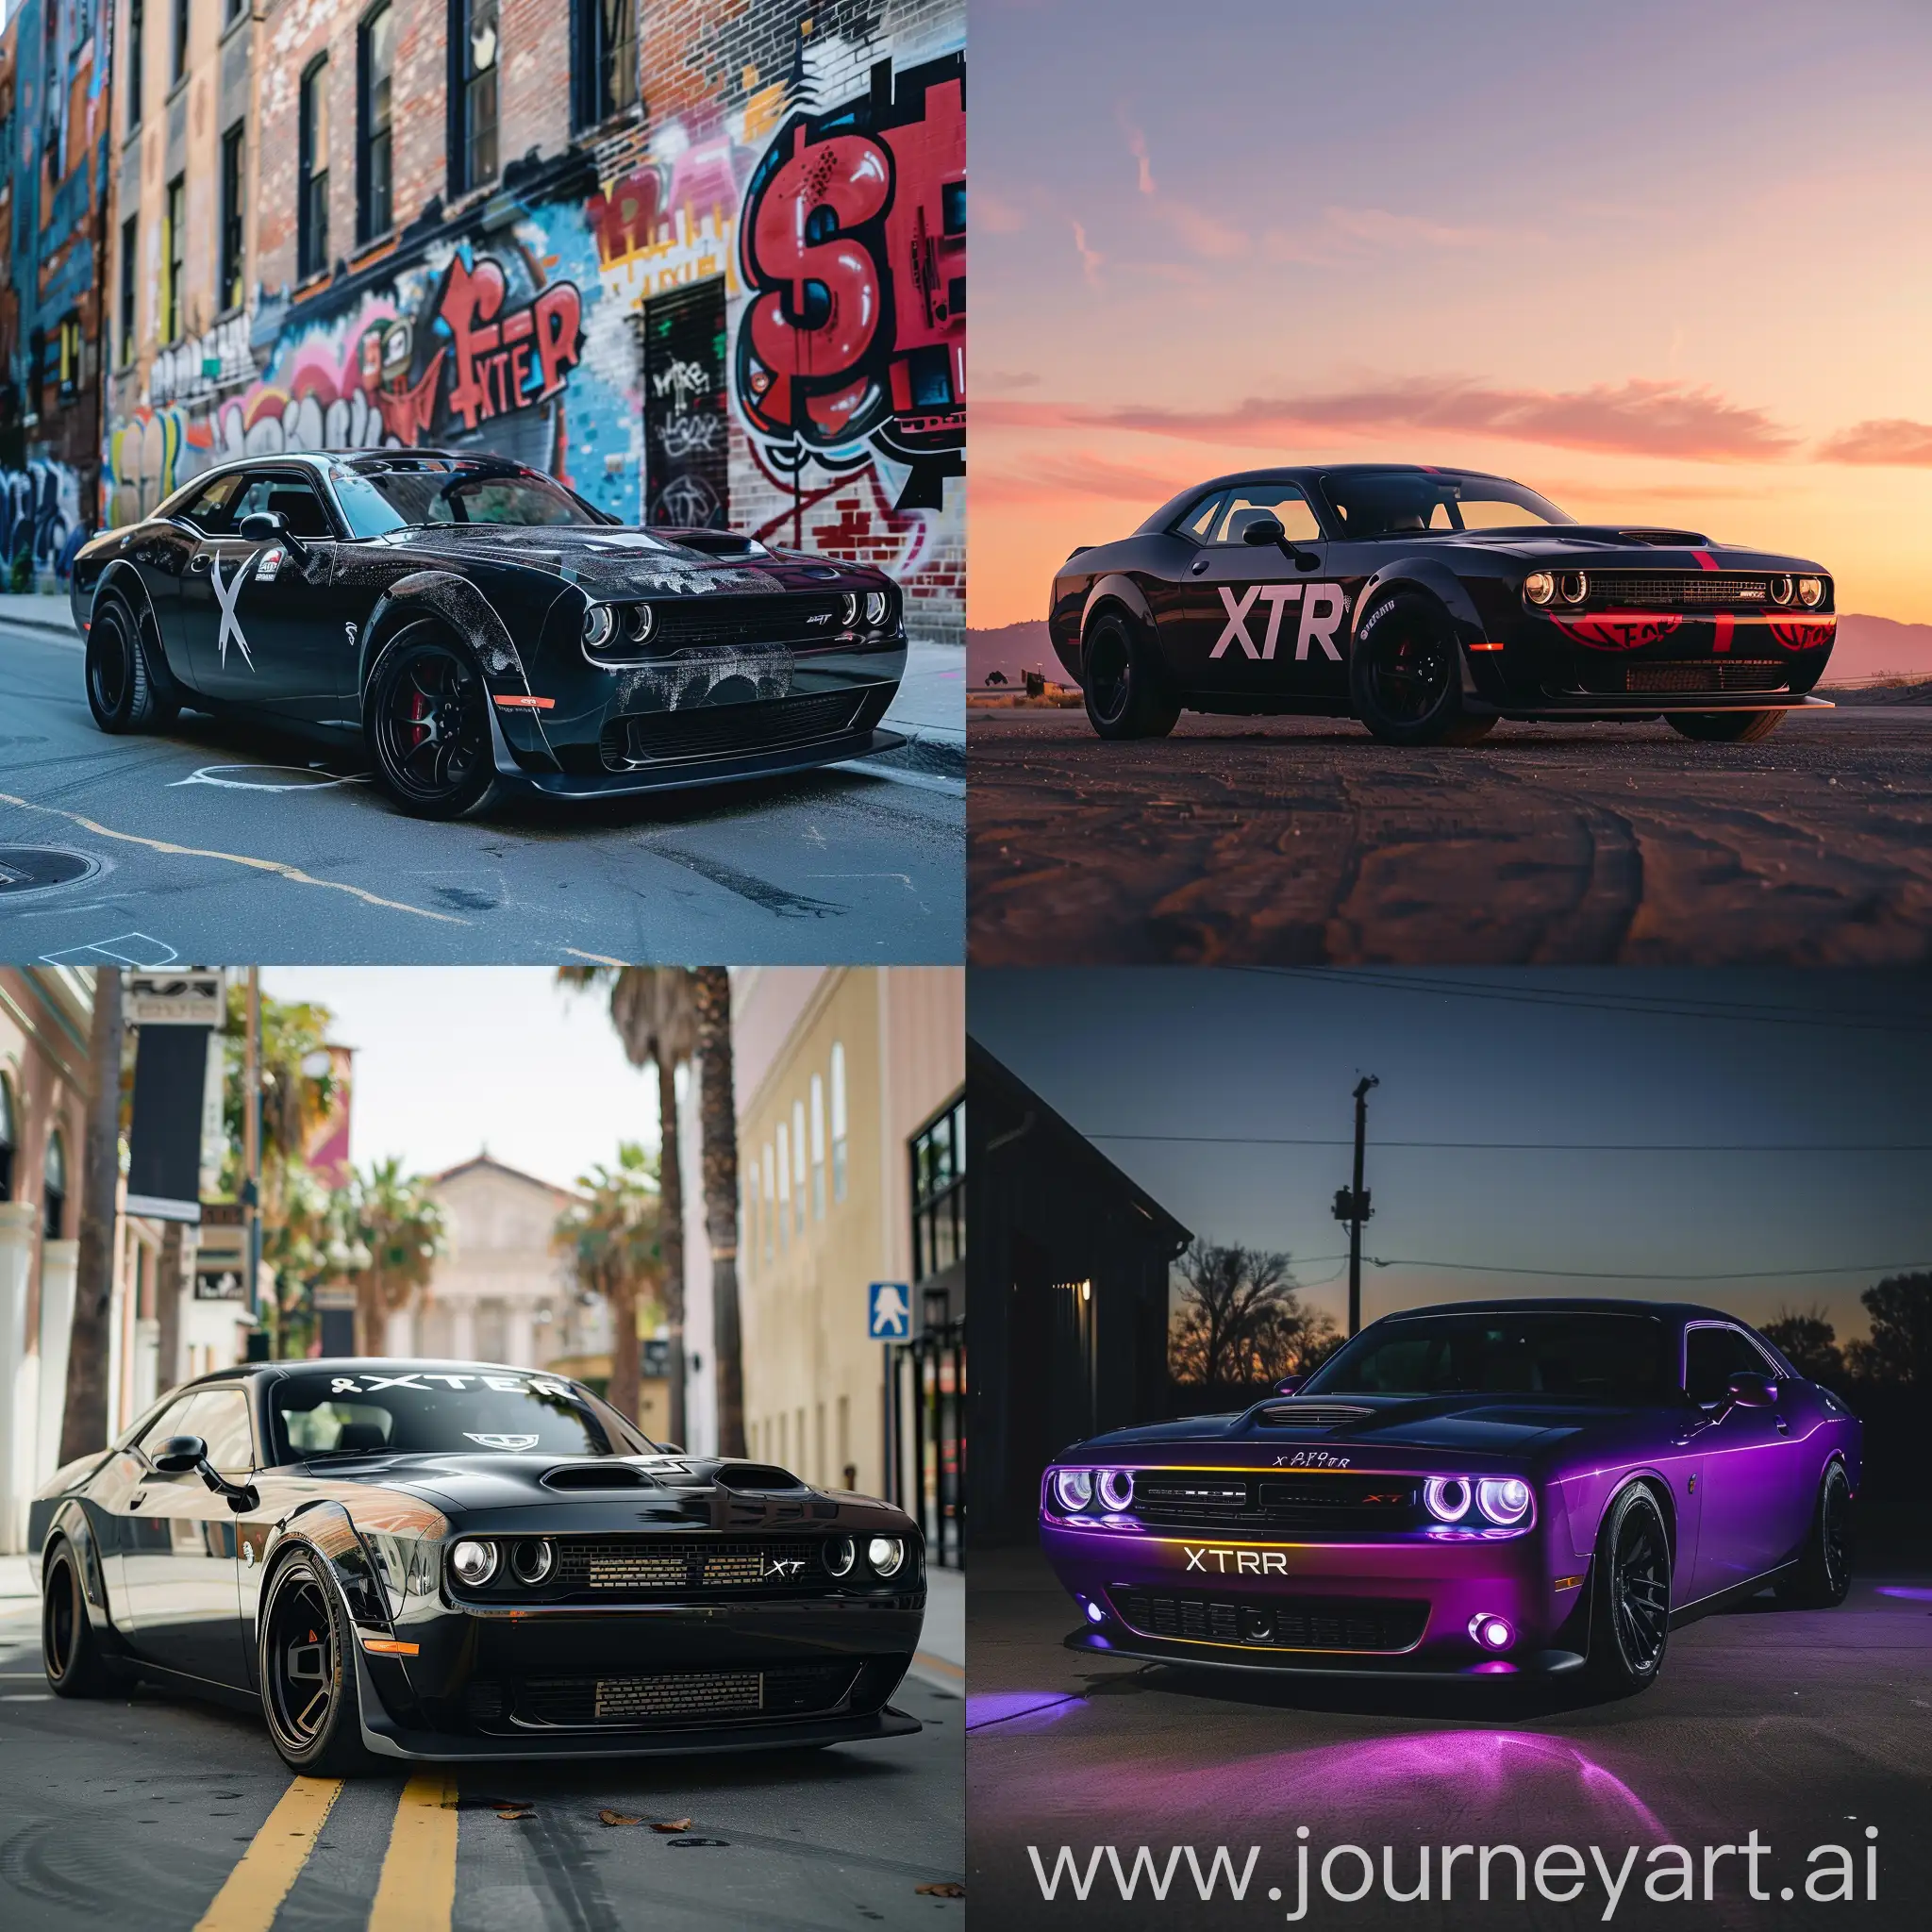 Sleek-Dodge-Challenger-with-XTER-Logo-in-Vibrant-Colors